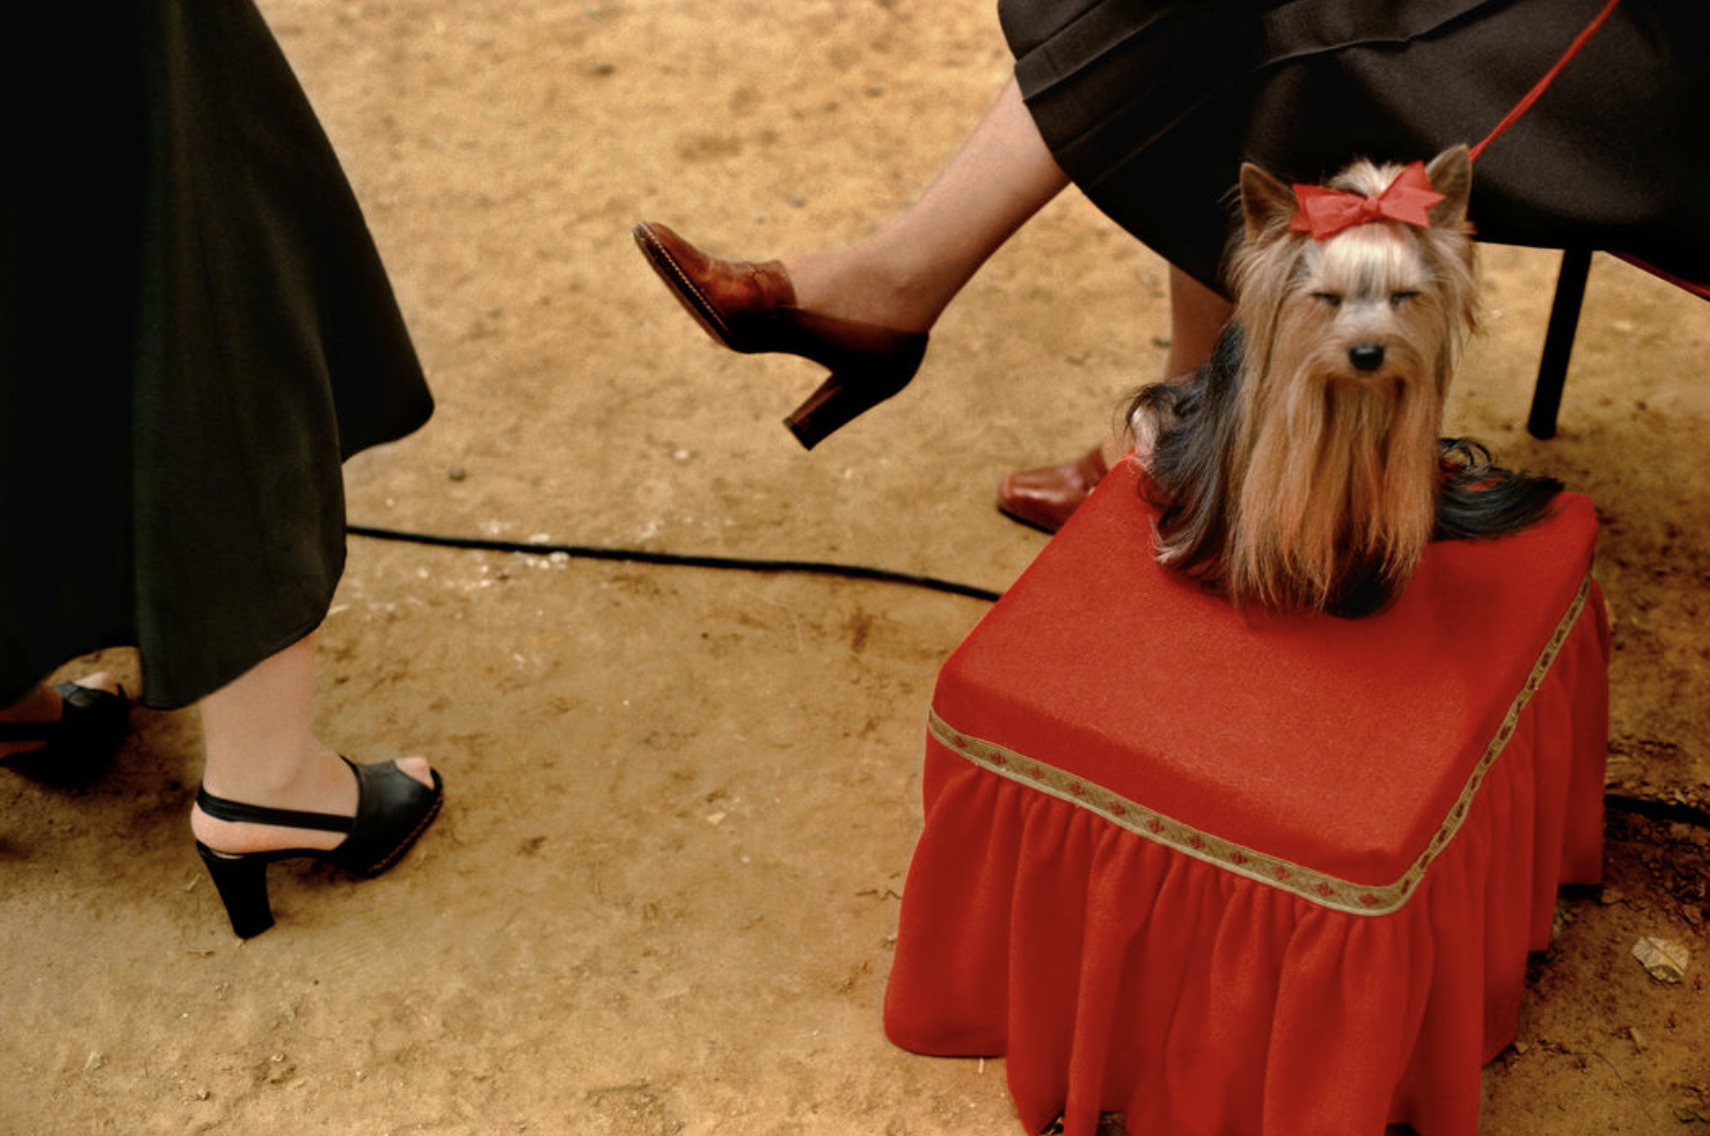 Candid view of a small dog sitting on a red ottoman next to two women in high heels